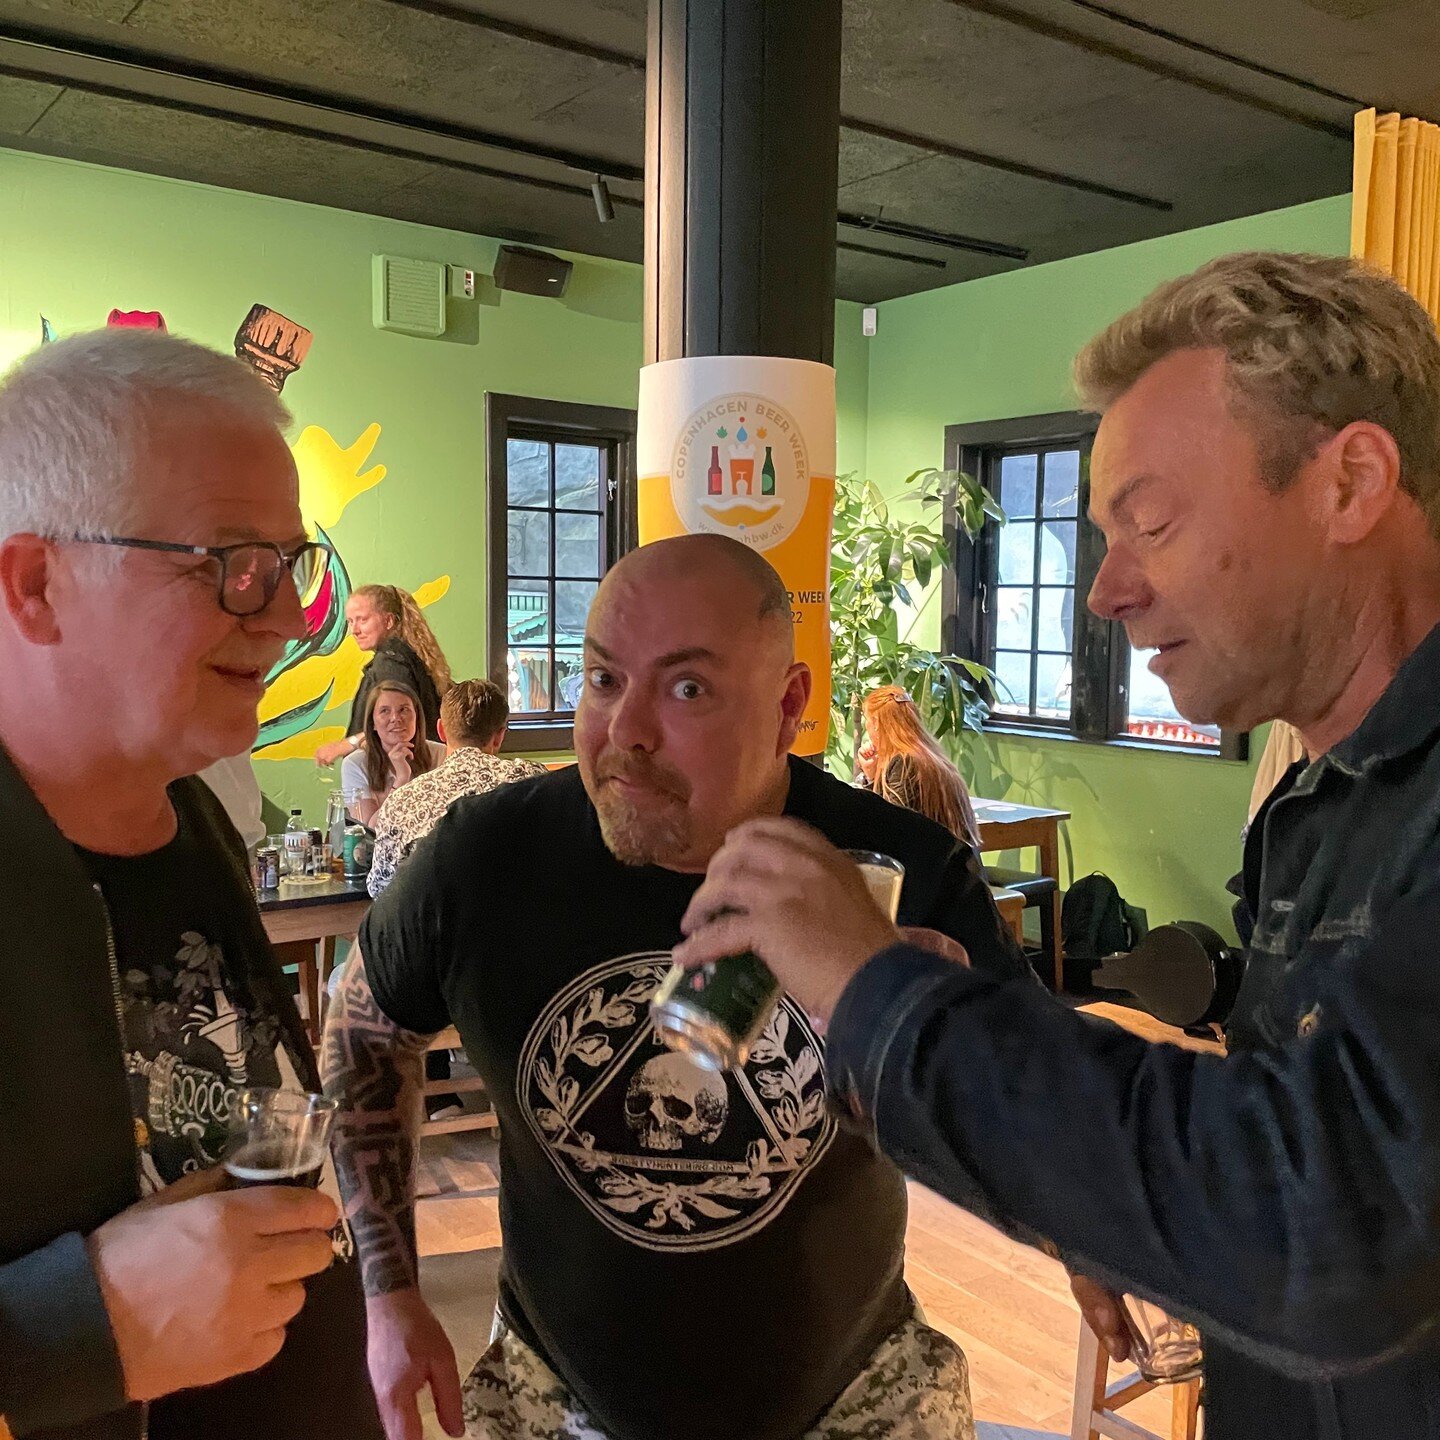 For Teedawn and other light birds, it is important to mingle with all beer people, even those who prefer more weight. If you feel the same way, visit Copenhagen Beer Week. #copenhagenbeerweek2022 #anarkistbartivoli #teedawn #mindfuldrinking